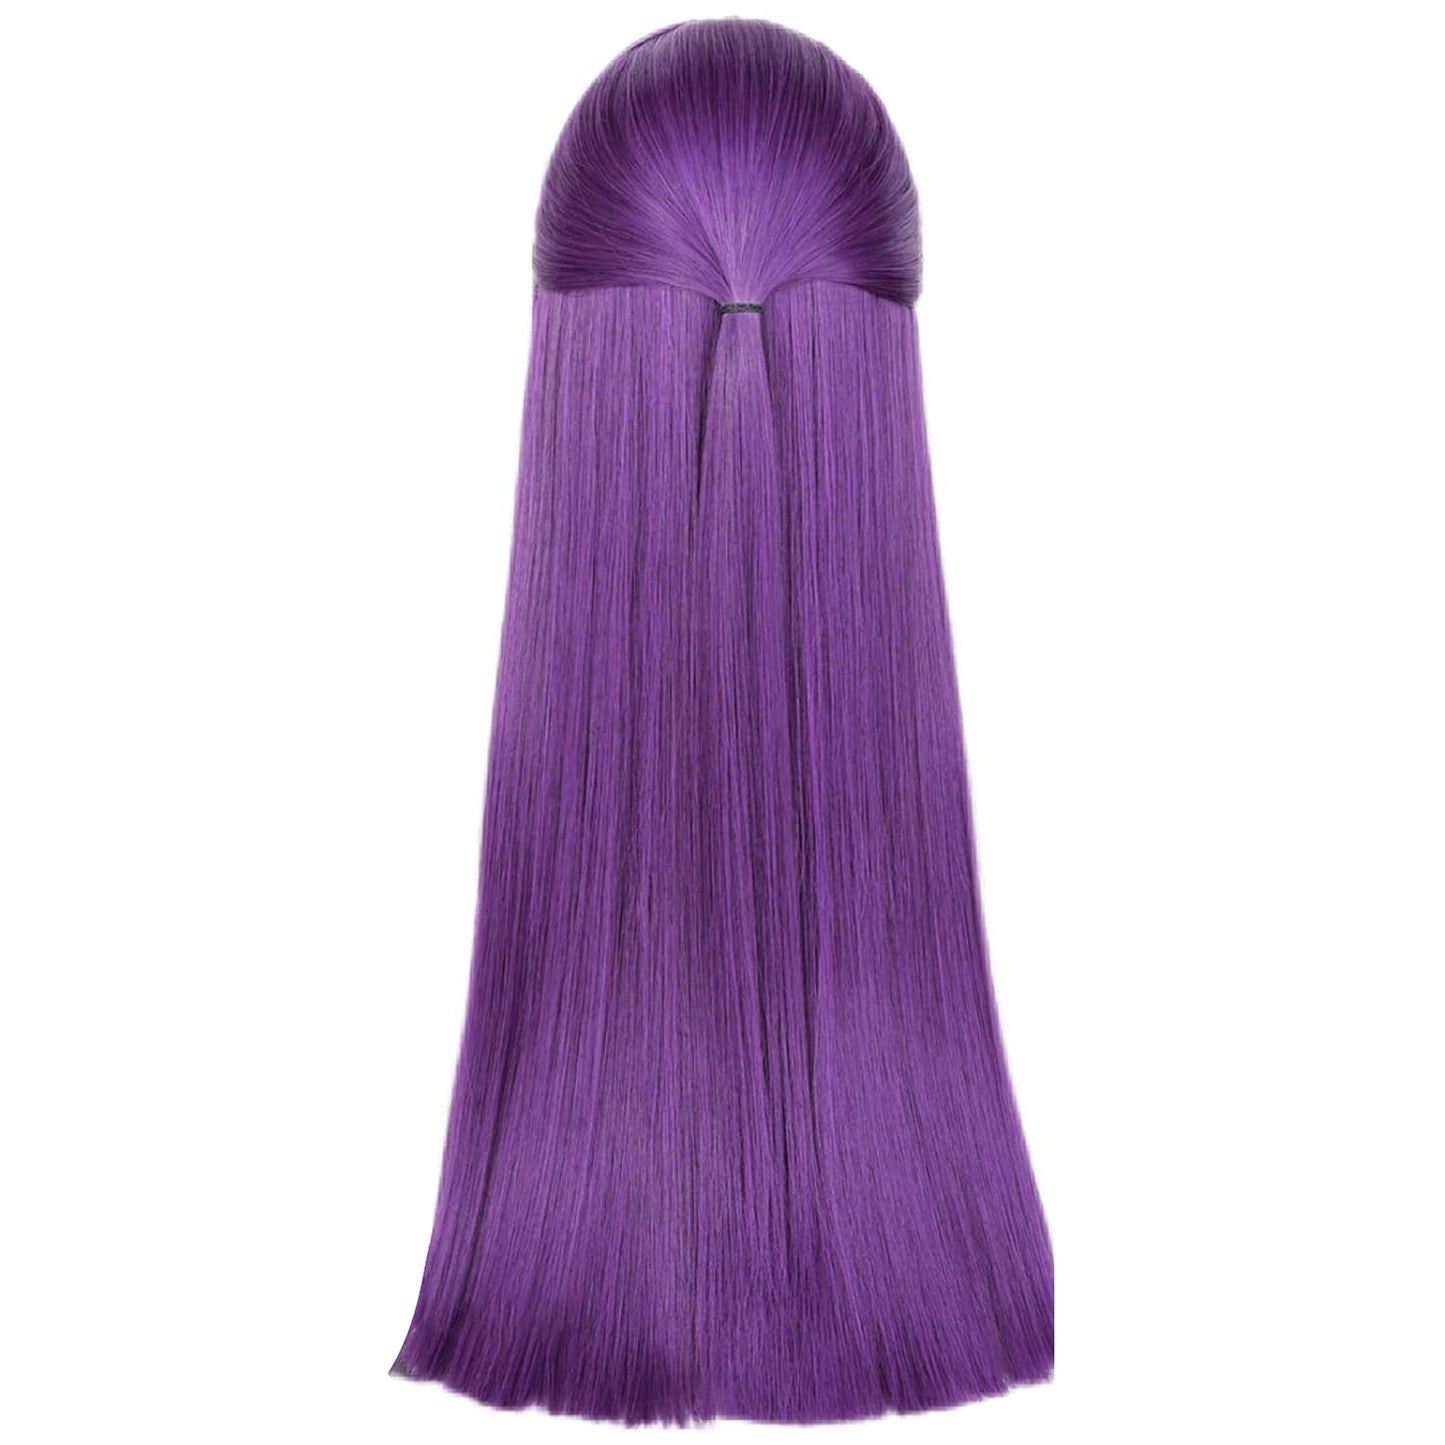 Fern Long Purple Straight Wig with Bangs